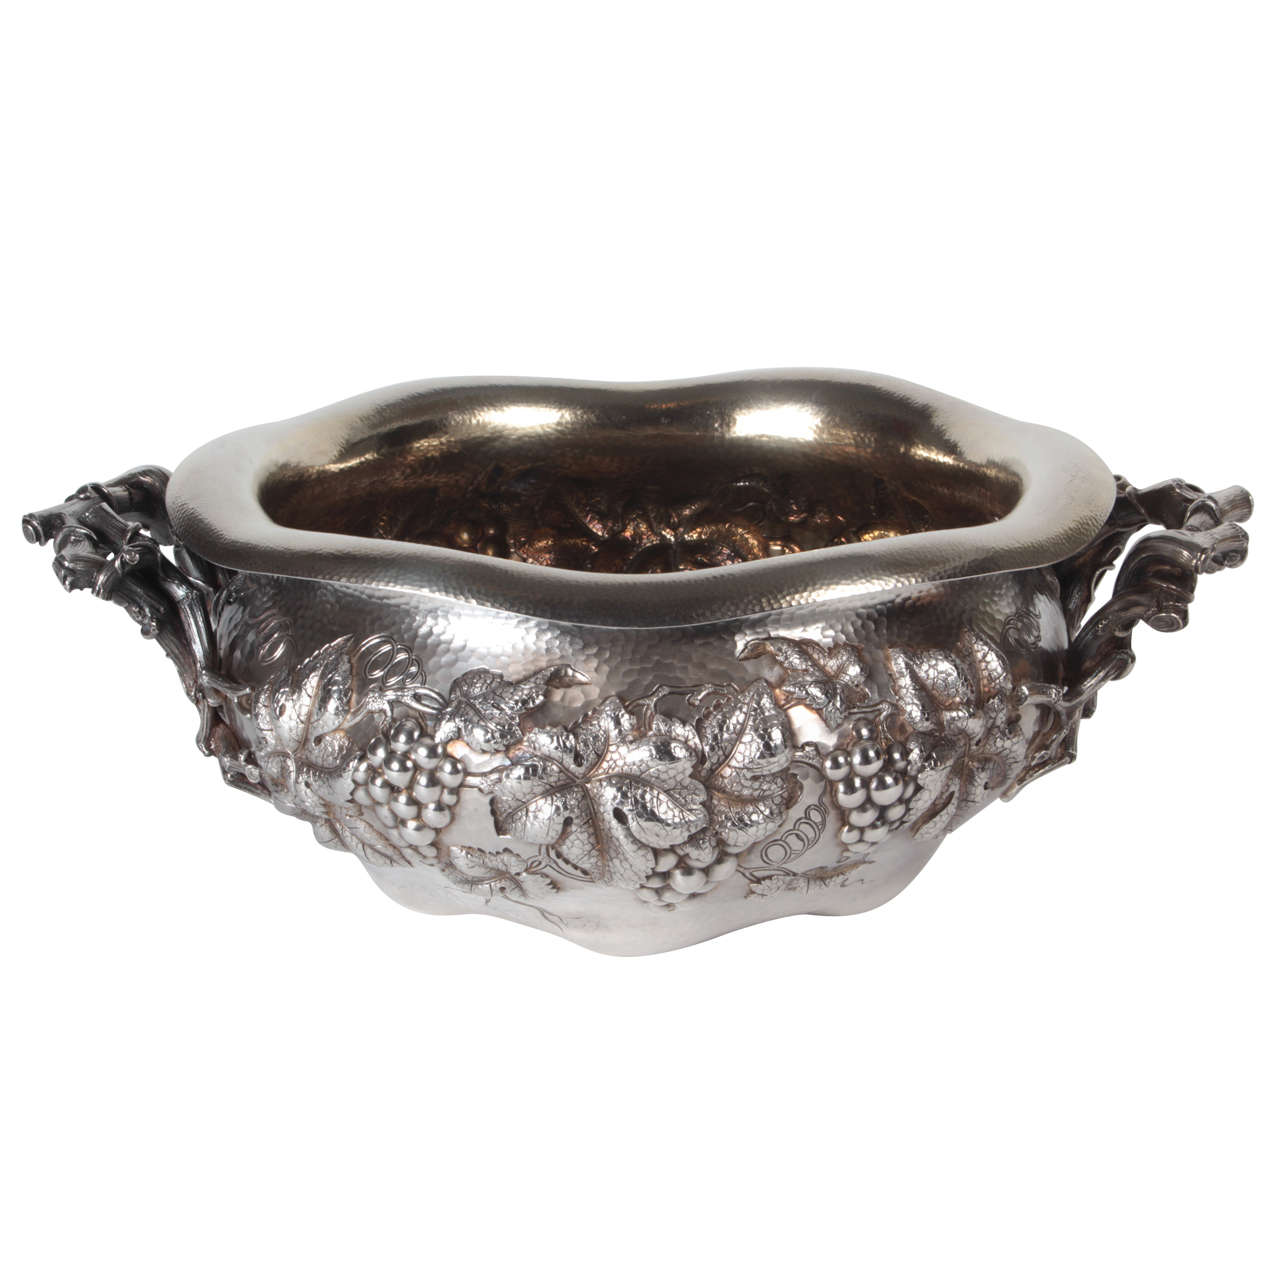 Dominick & Haff New York Grand Sterling "Grape" Theme Centerpiece Bowl 1883 For Sale